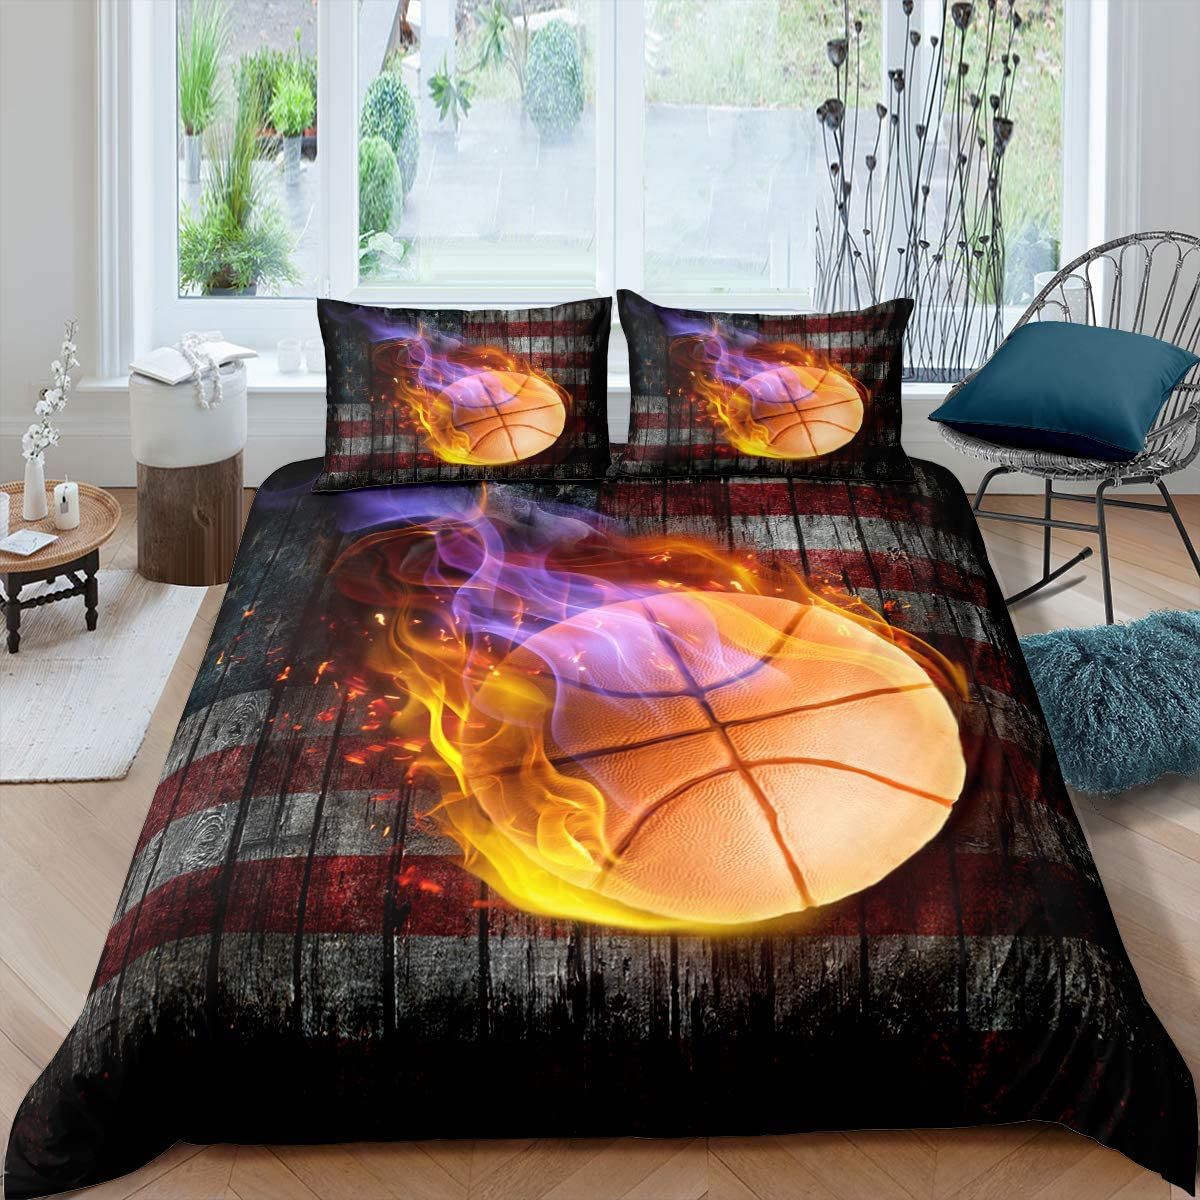 Basketball American Flag With Fire Bedding Set